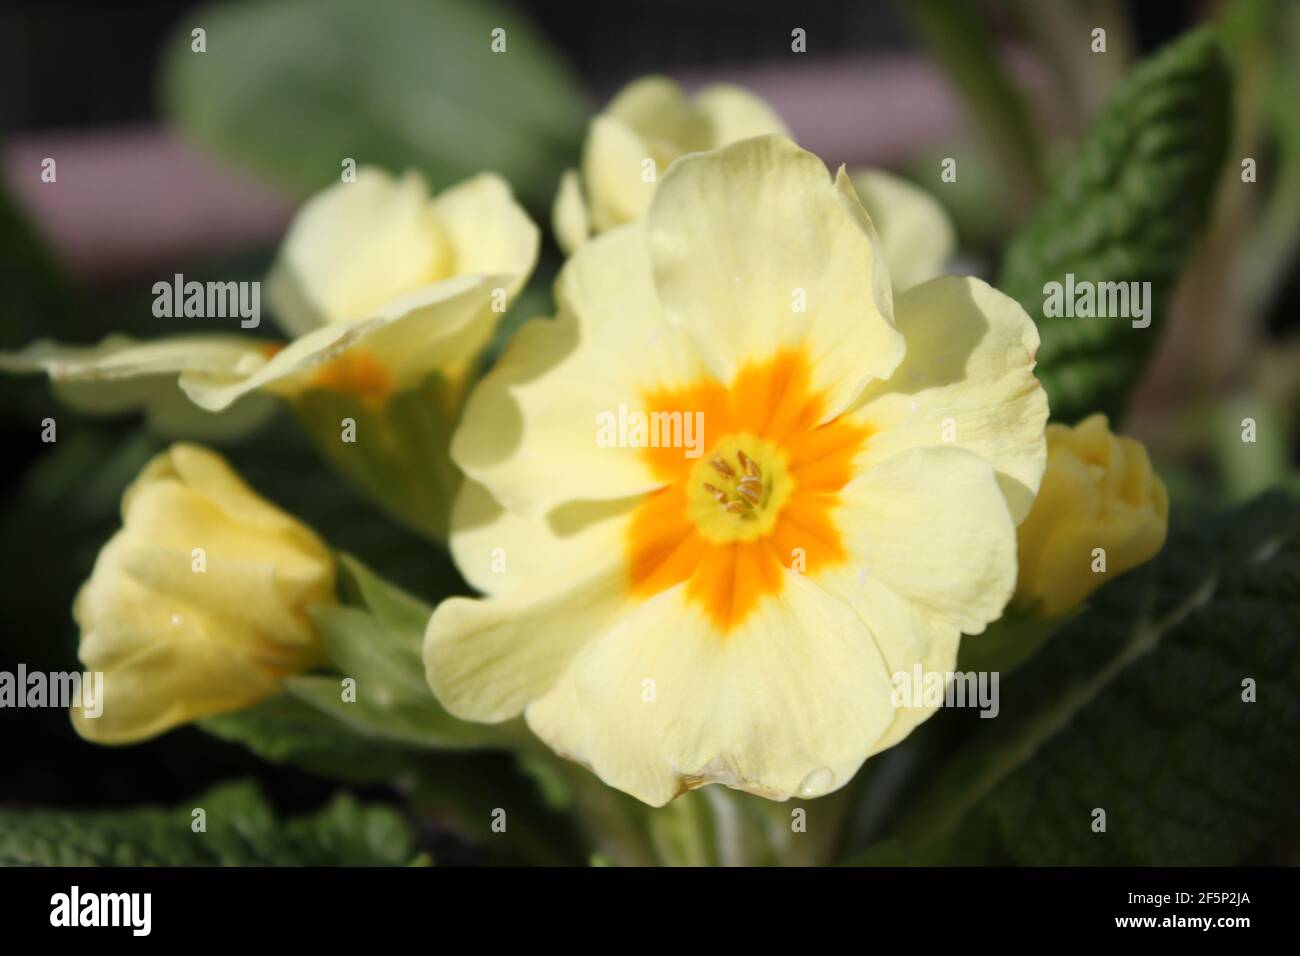 Flower portrait of a delicate white primrose with yellow centre. Spring blooms found in your garden or the natural woodlands. White primroses in UK. Stock Photo